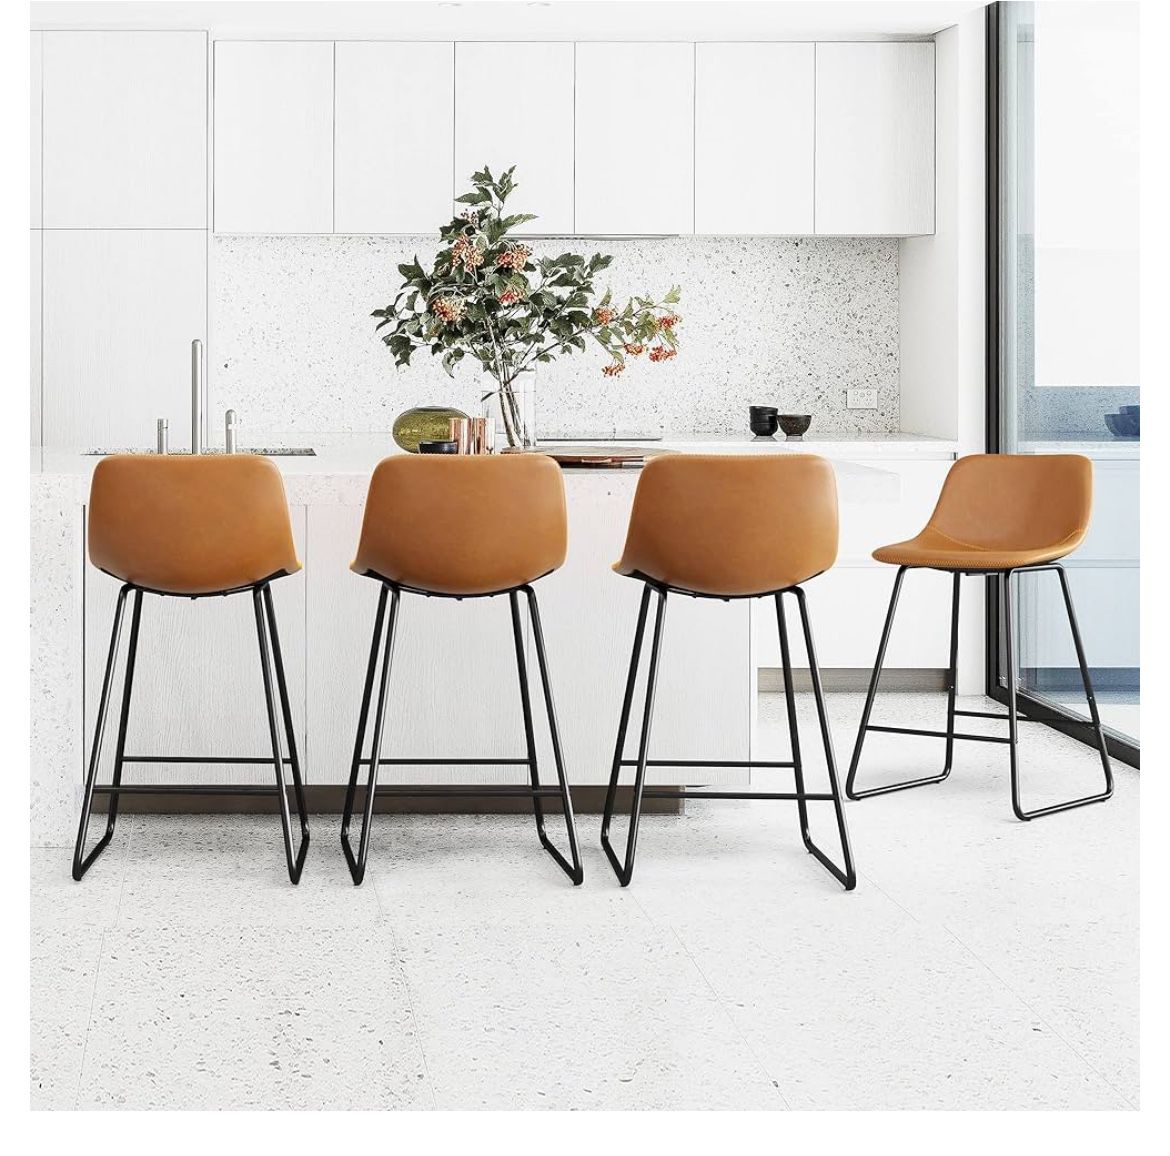 Bar Stools Set of 4, 24" ALX Faux Leather Barstools, Modern Counter Height Stools with Back and Metal Legs, Armless Counter Chairs for Kitchen Island,